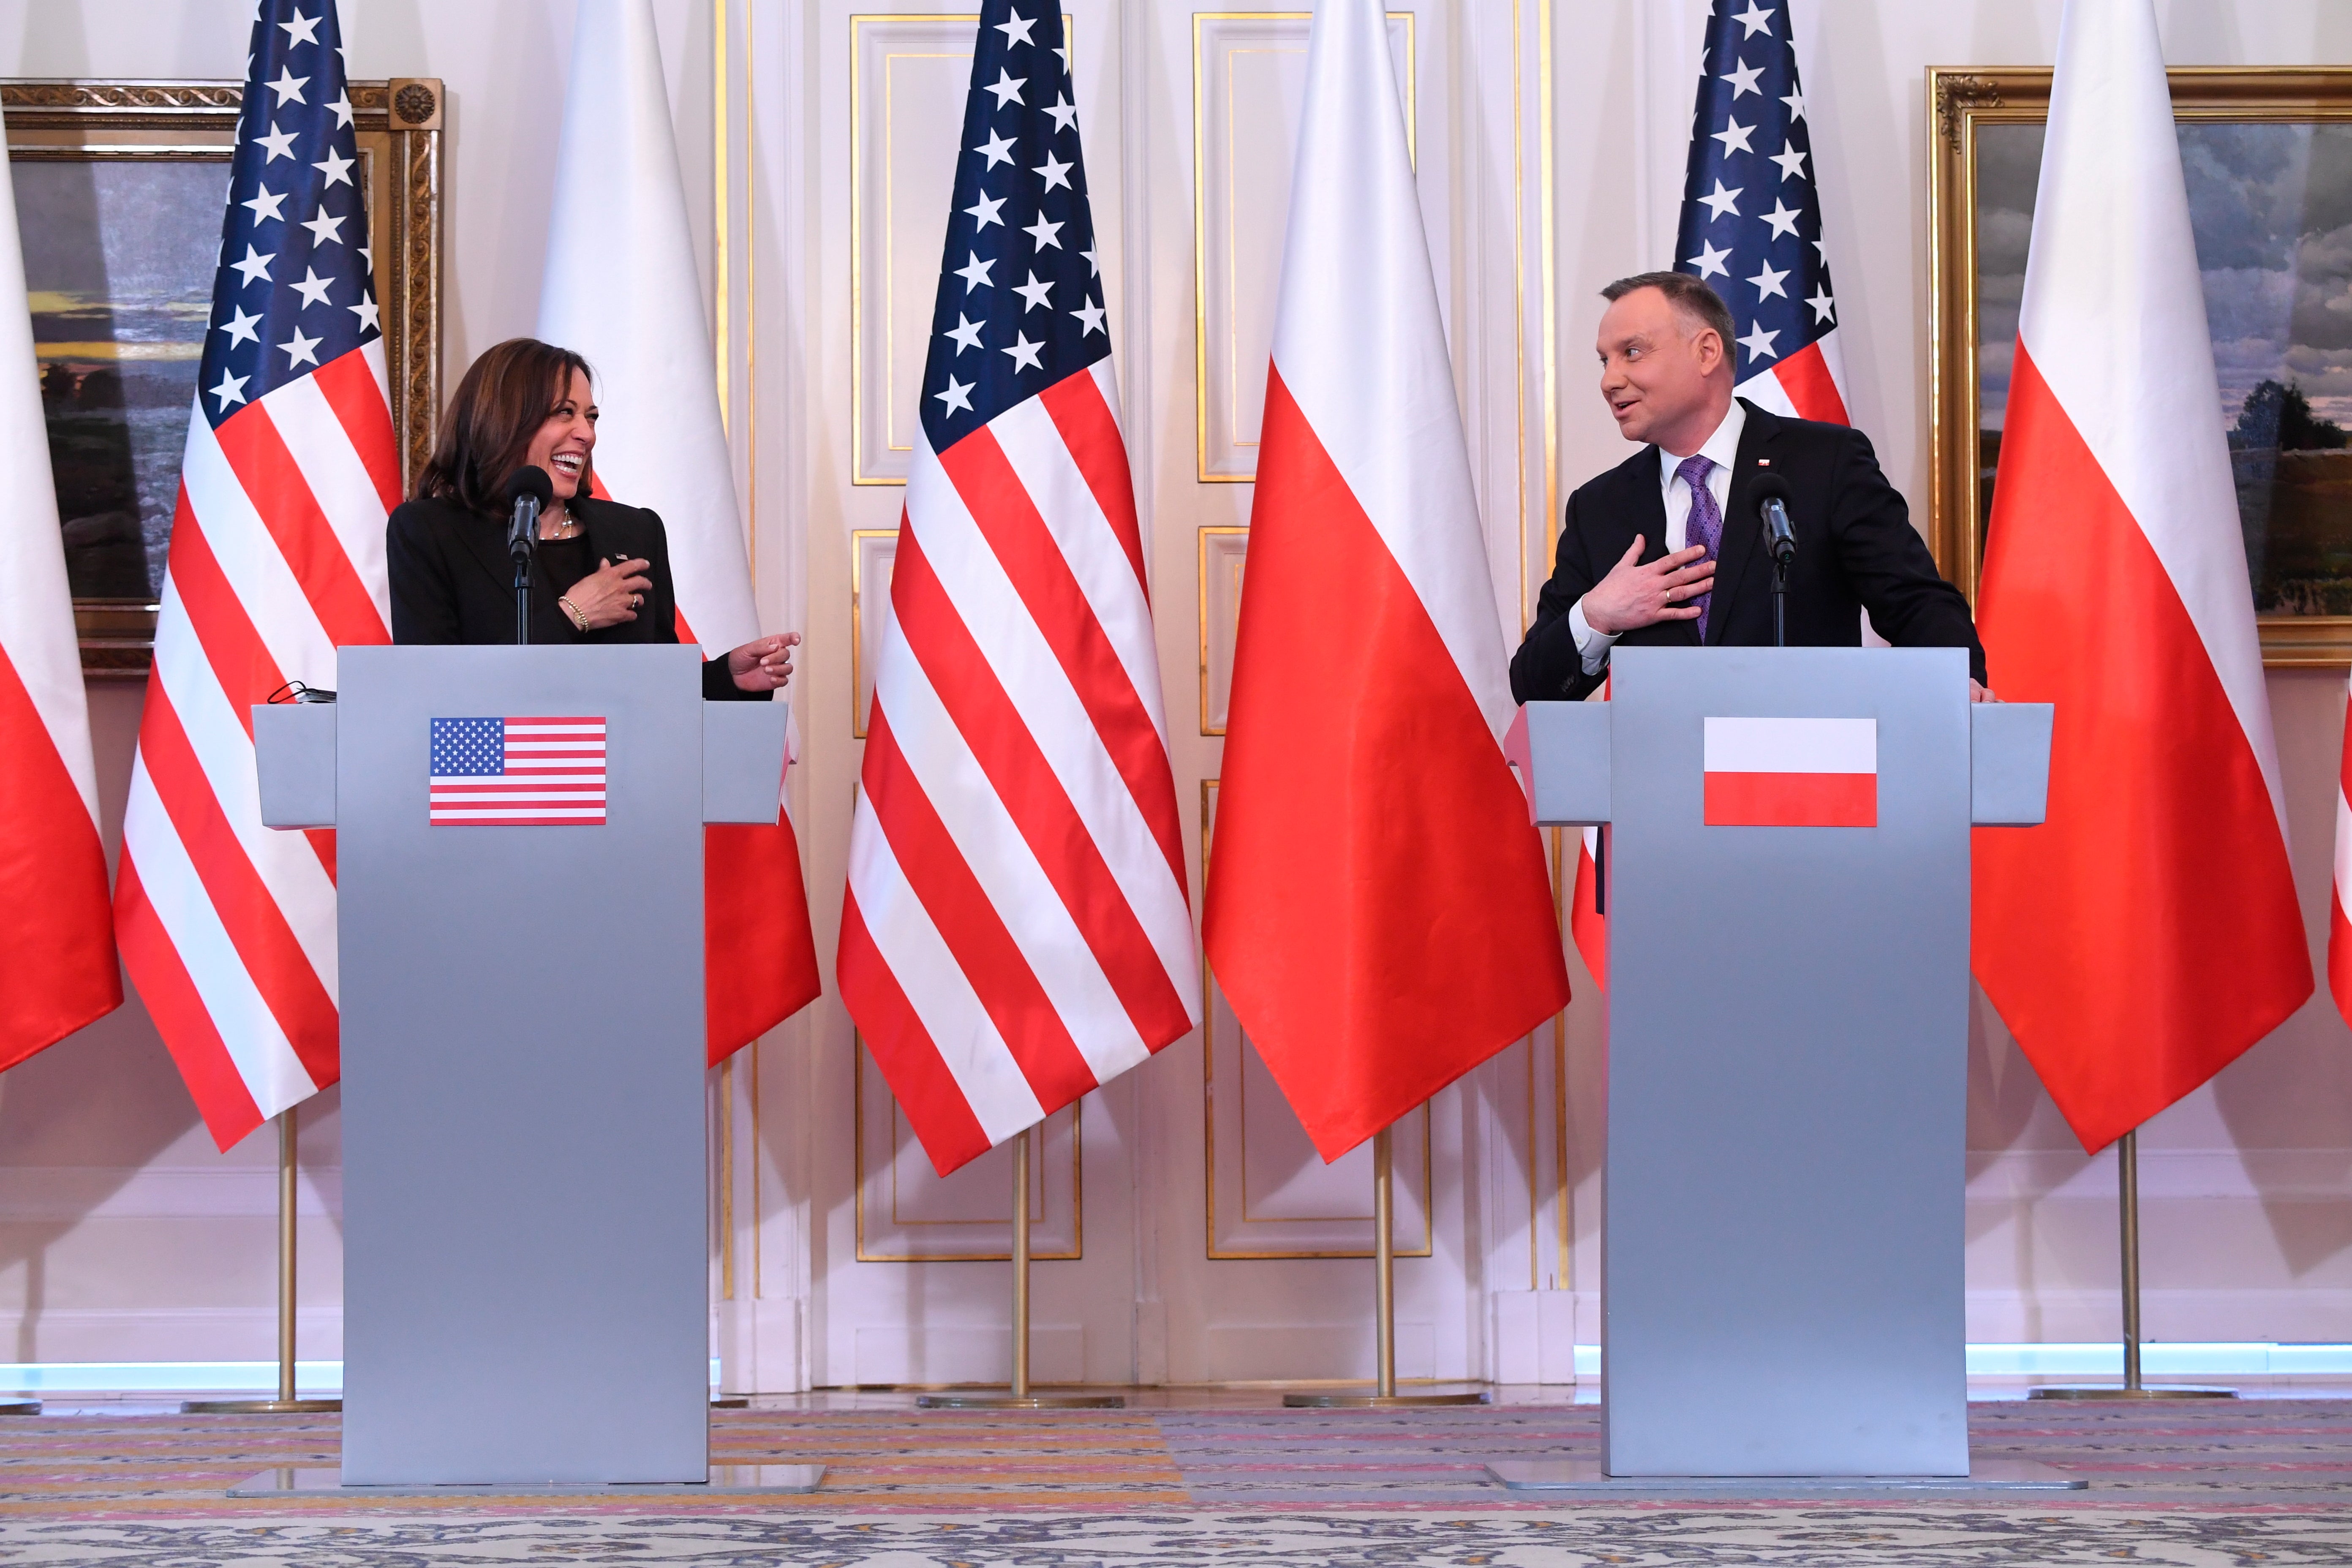 <p>Polish President Andrzej Duda, right, and US Vice President Kamala Harris hold a press conference at Belwelder Palace, in Warsaw, Poland, Thursday, March 10, 2022. (Saul Loeb/Pool Photo via AP)</p>